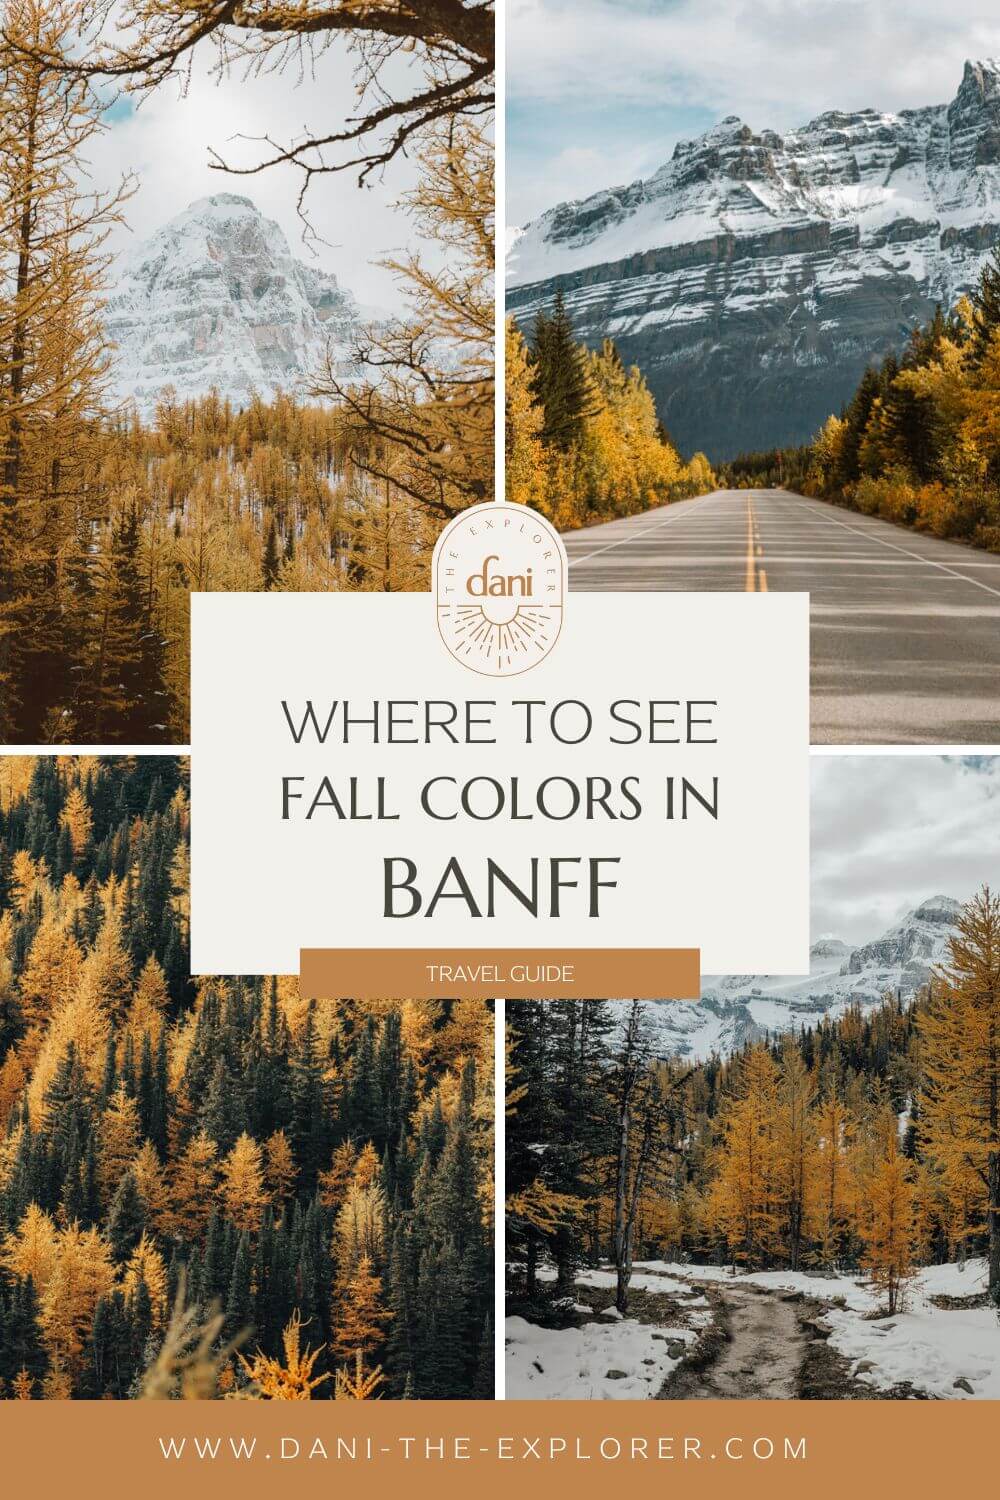 Where to see fall colors in banff national park